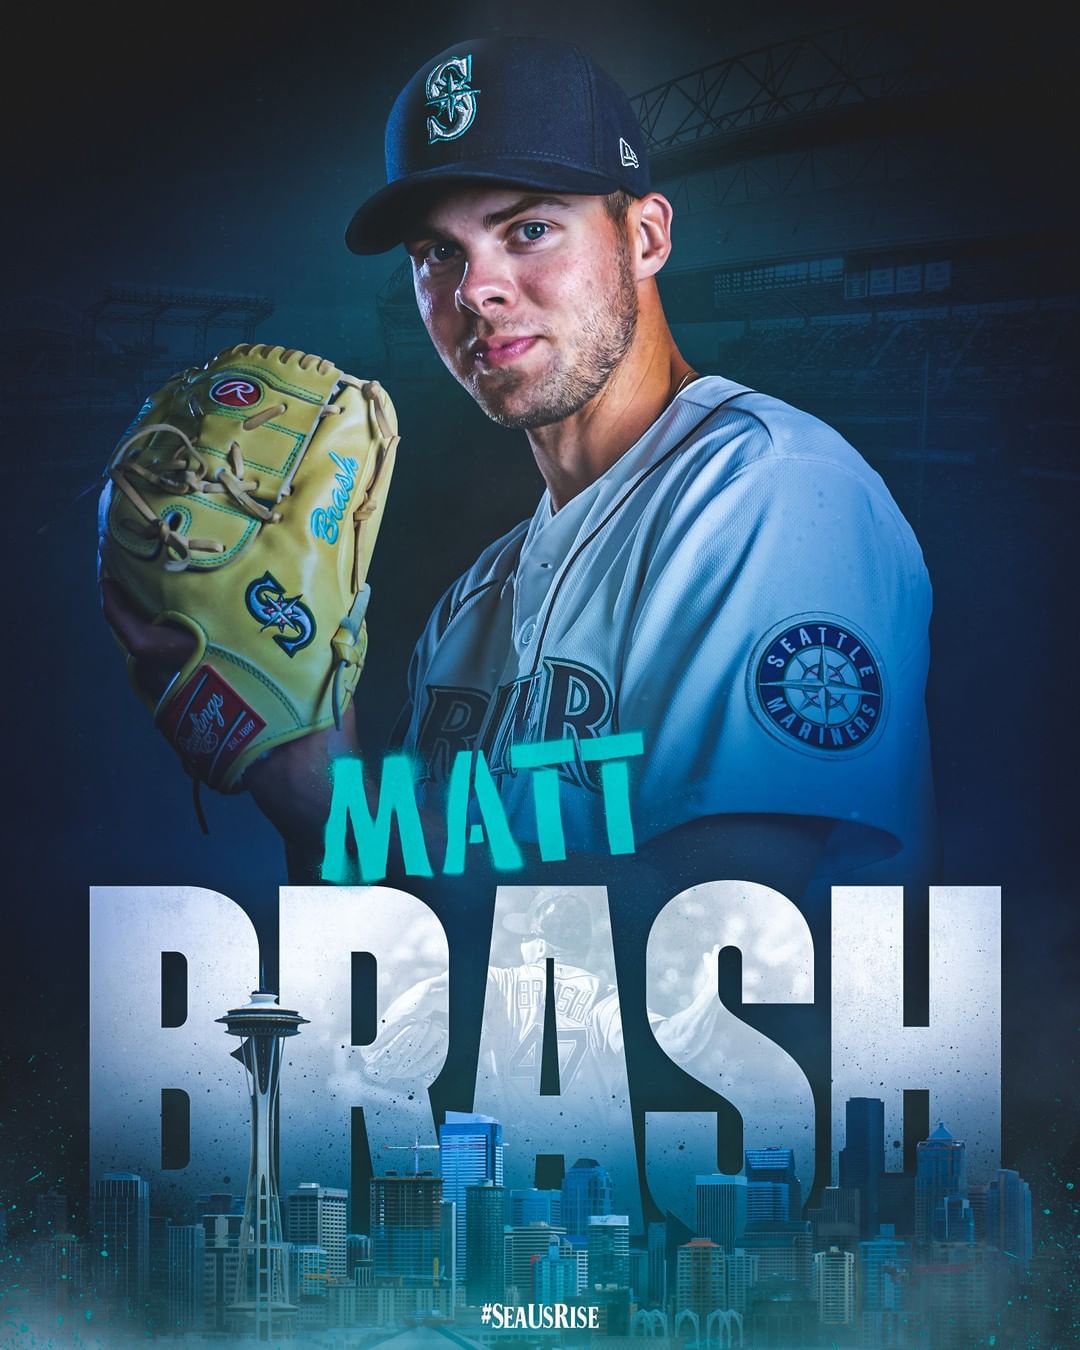 it in. @mattbrash6 has secured a spot in our starting rotation. #SeaUsRise...